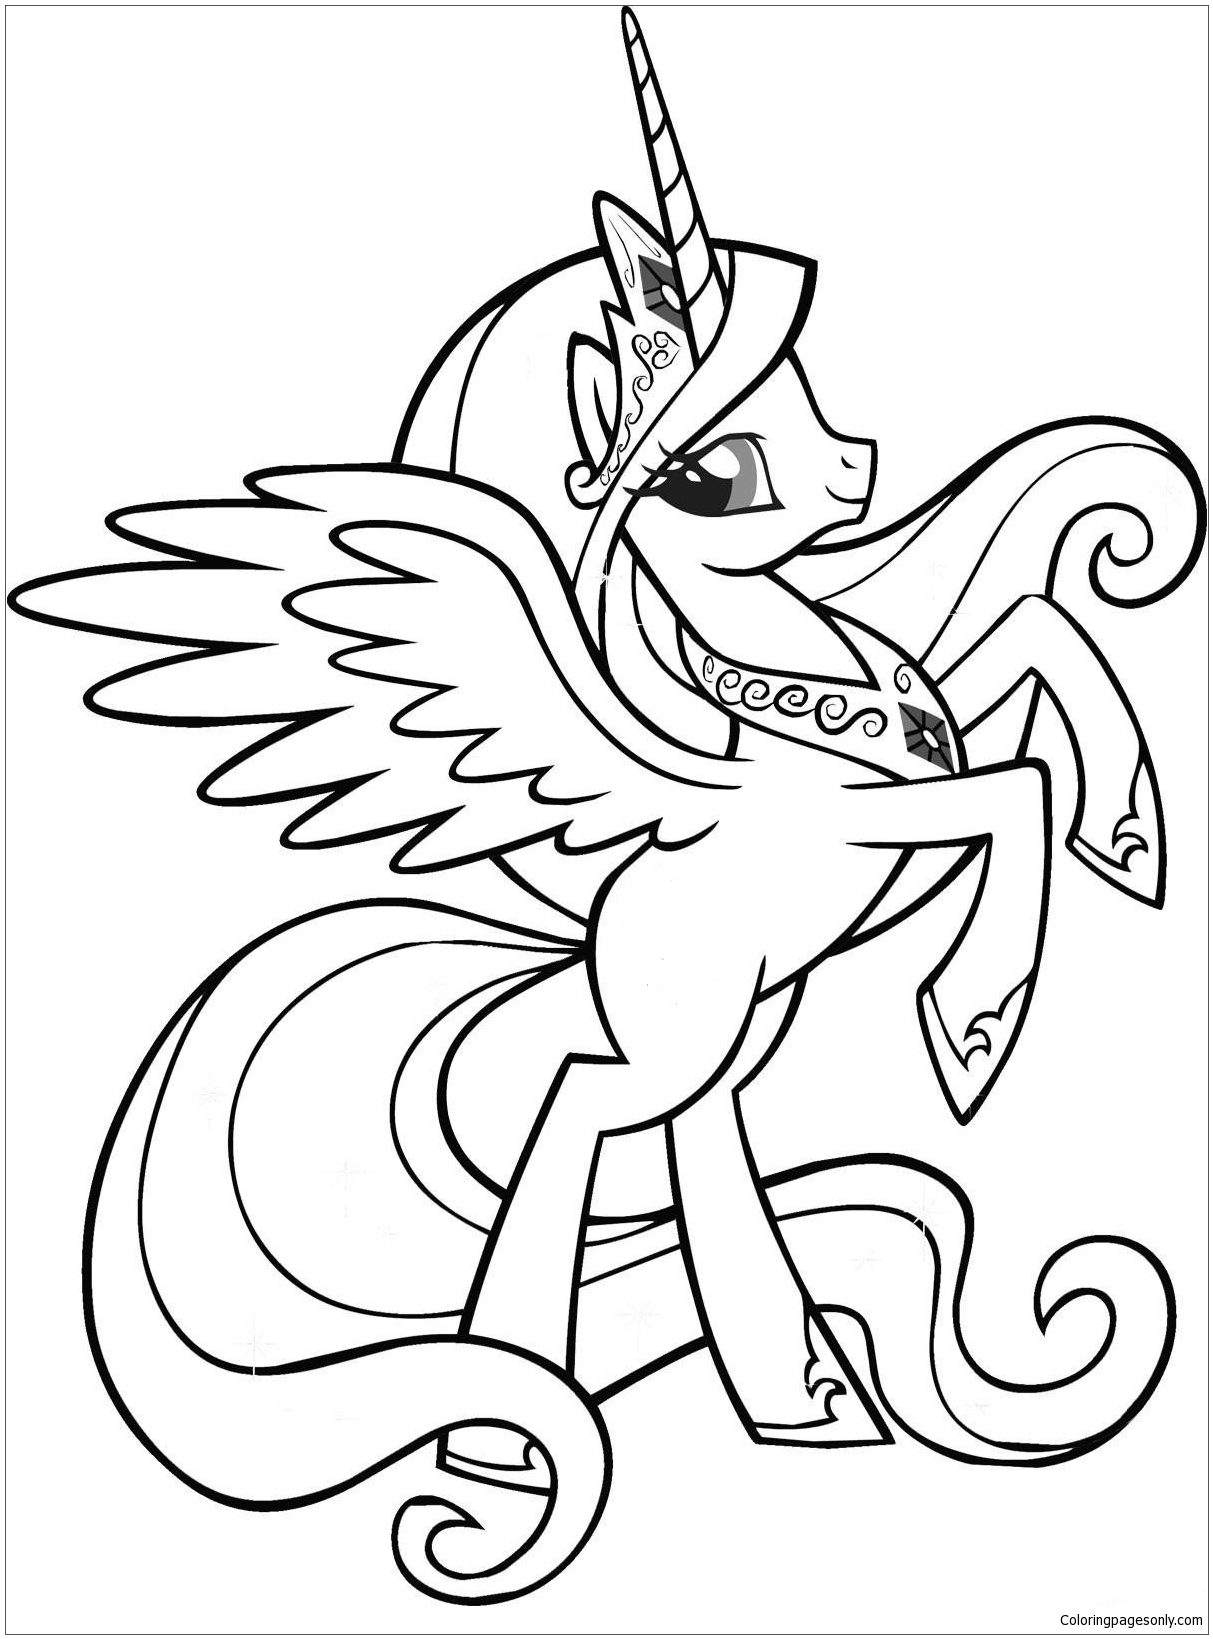 Cute Unicorn-image 4 Coloring Pages - Cartoons Coloring Pages